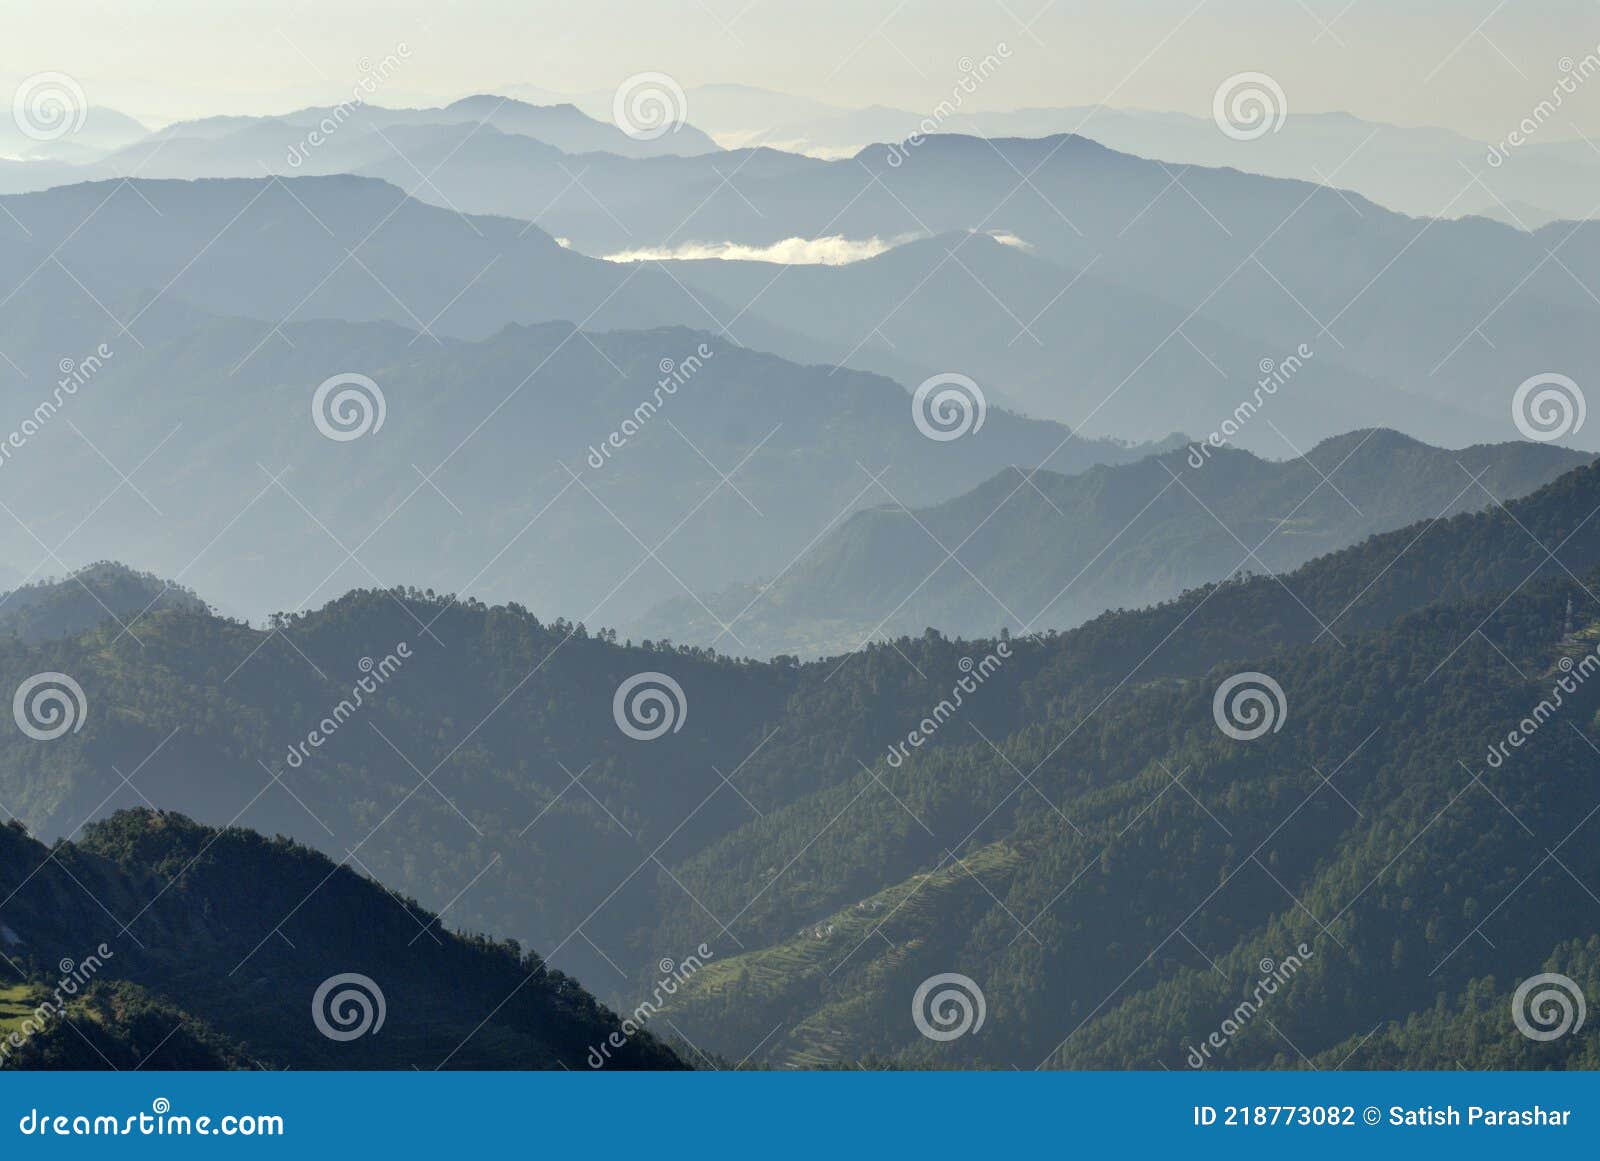 view of a himalayan valley